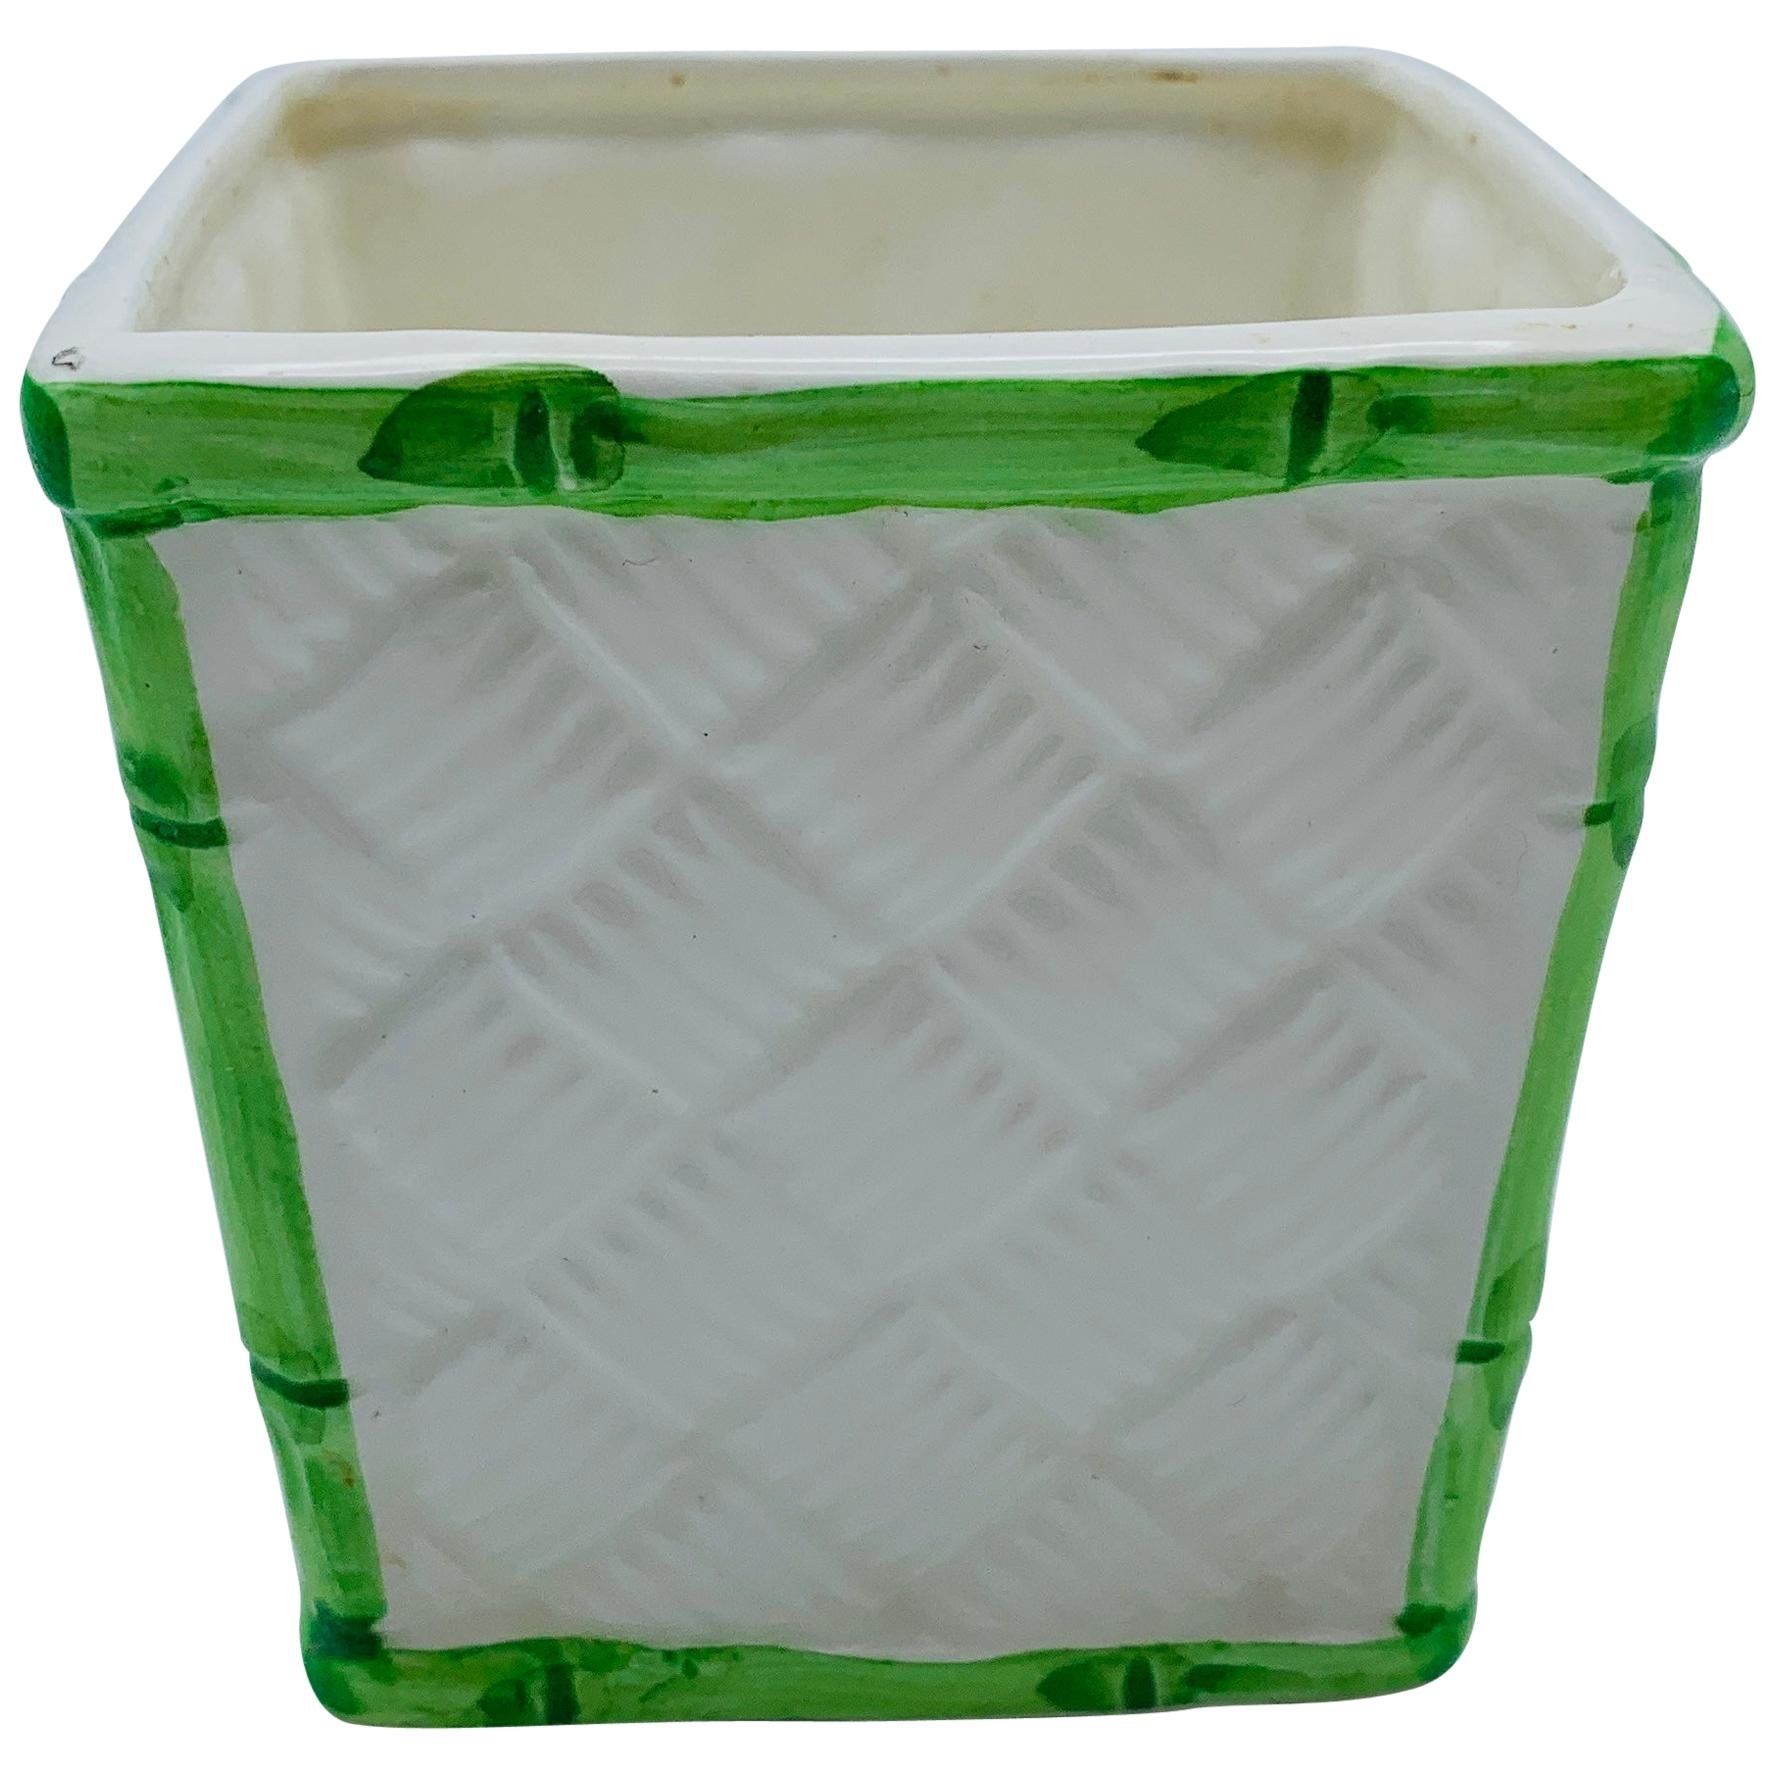 1960s Italian White and Green Basketweave and Faux Bamboo Ceramic Cachepot